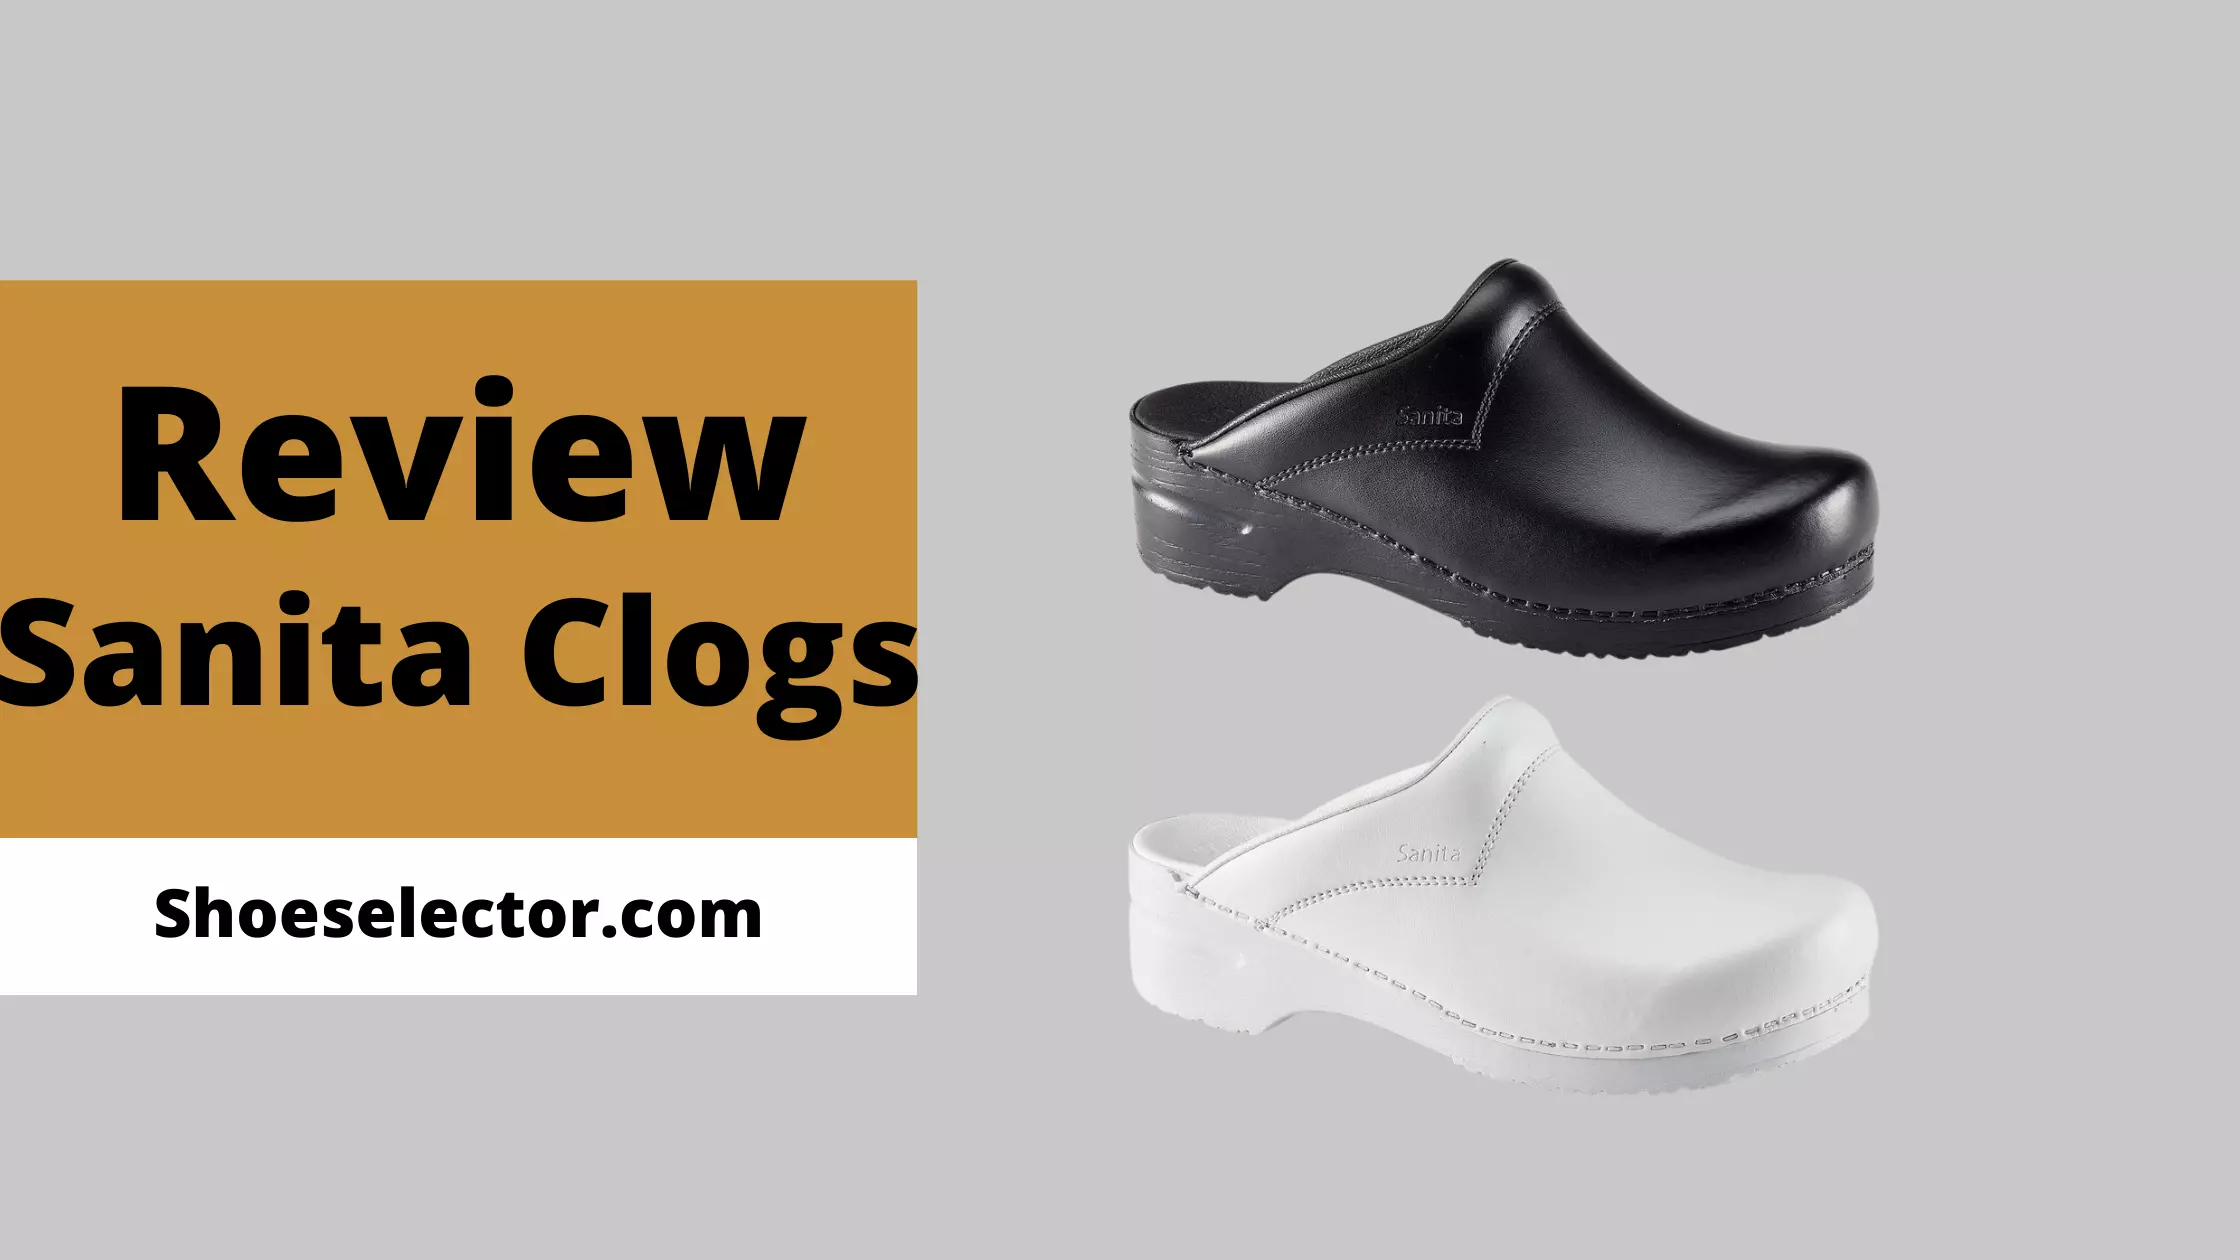 Sanita Clogs Review - Most Supportive Shoes